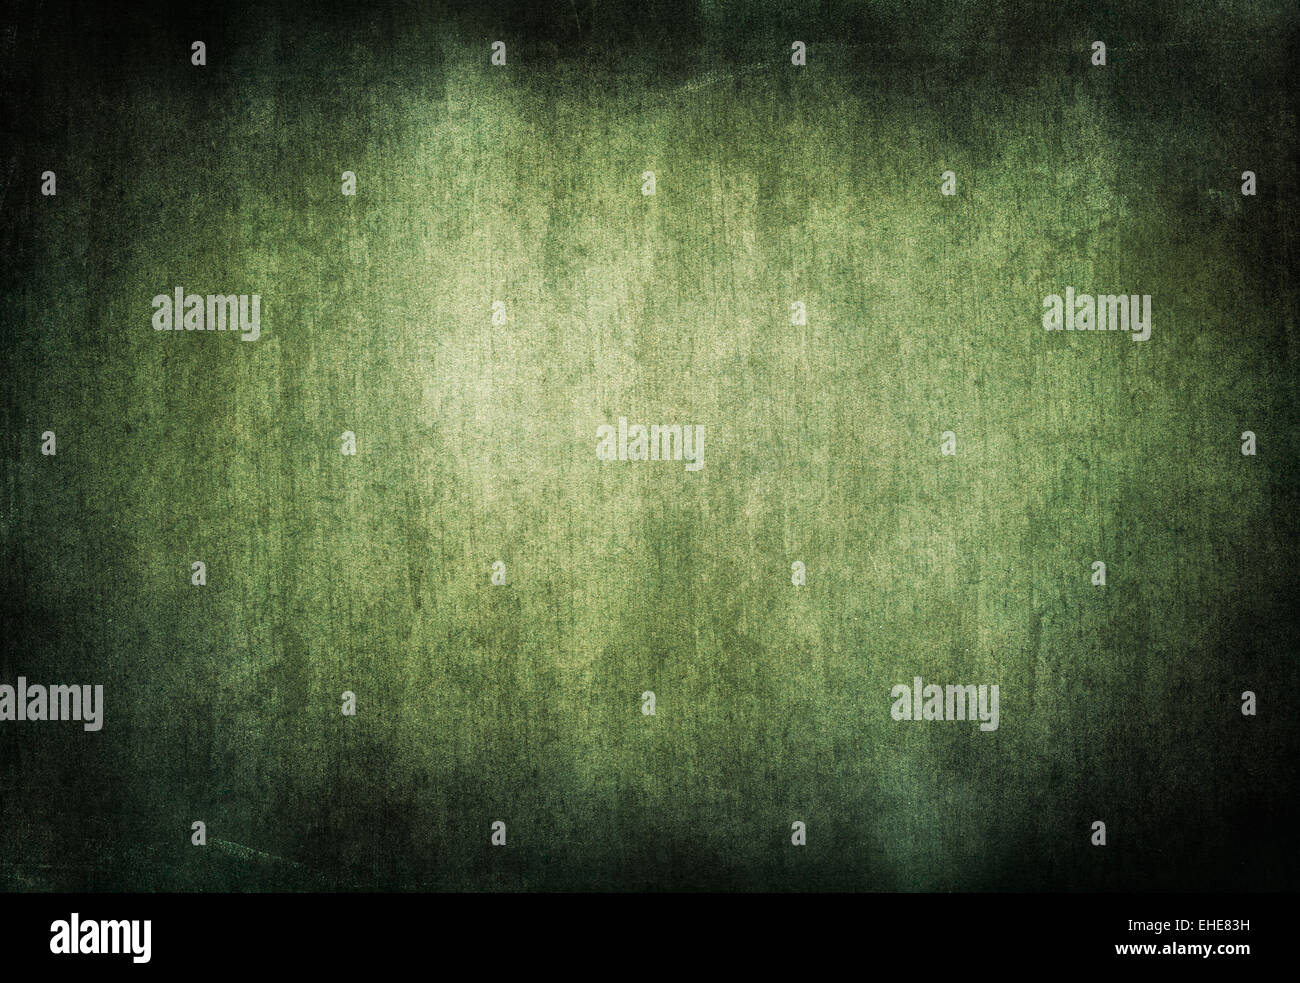 Grunge abstract green gamut background. Stock Photo